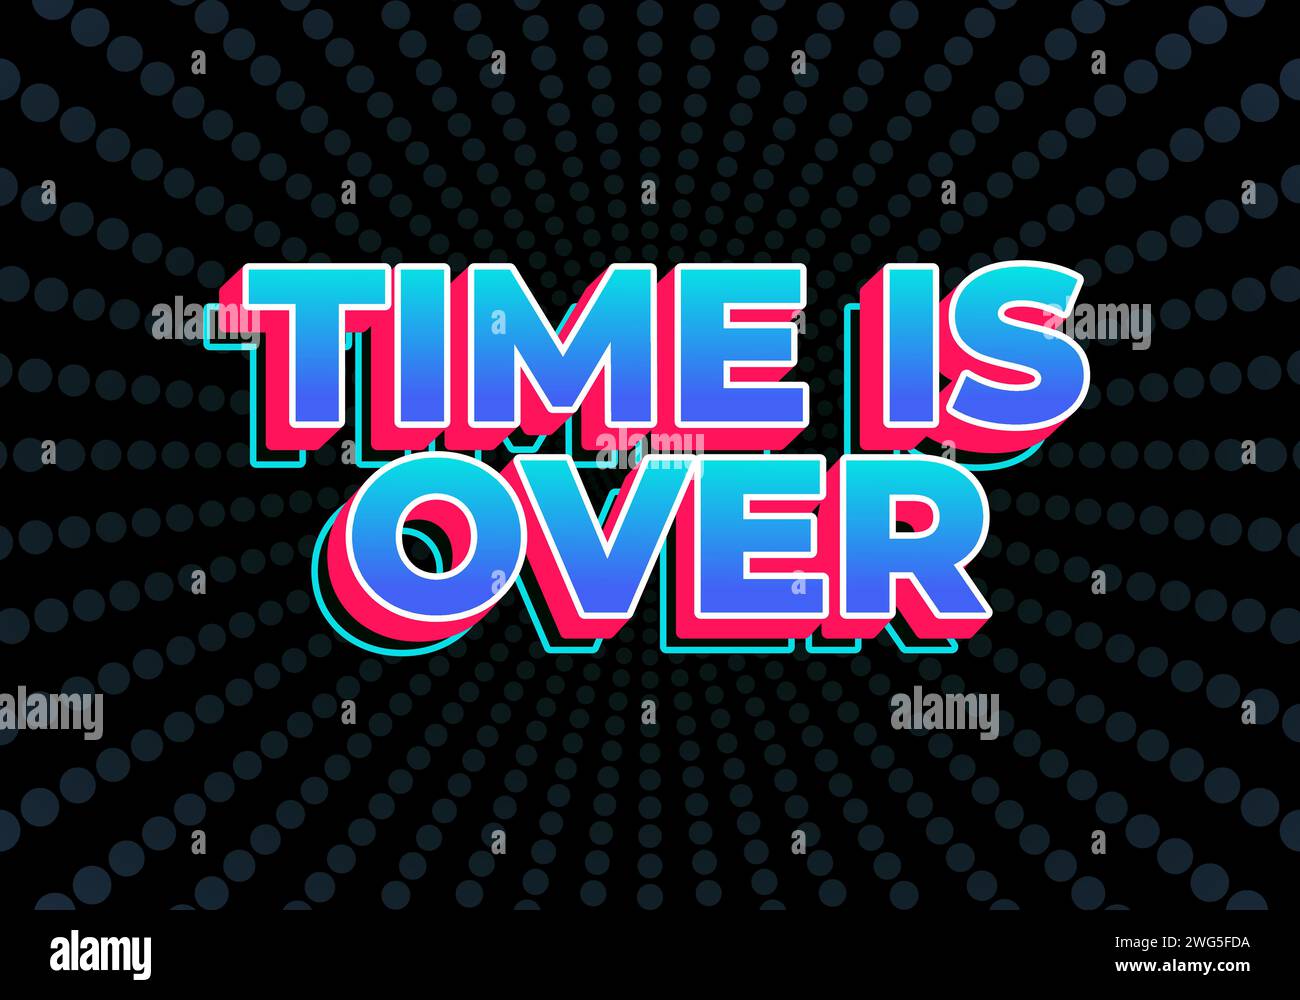 Time is over. Text effect design in gradient blue color with 3D look Stock Vector